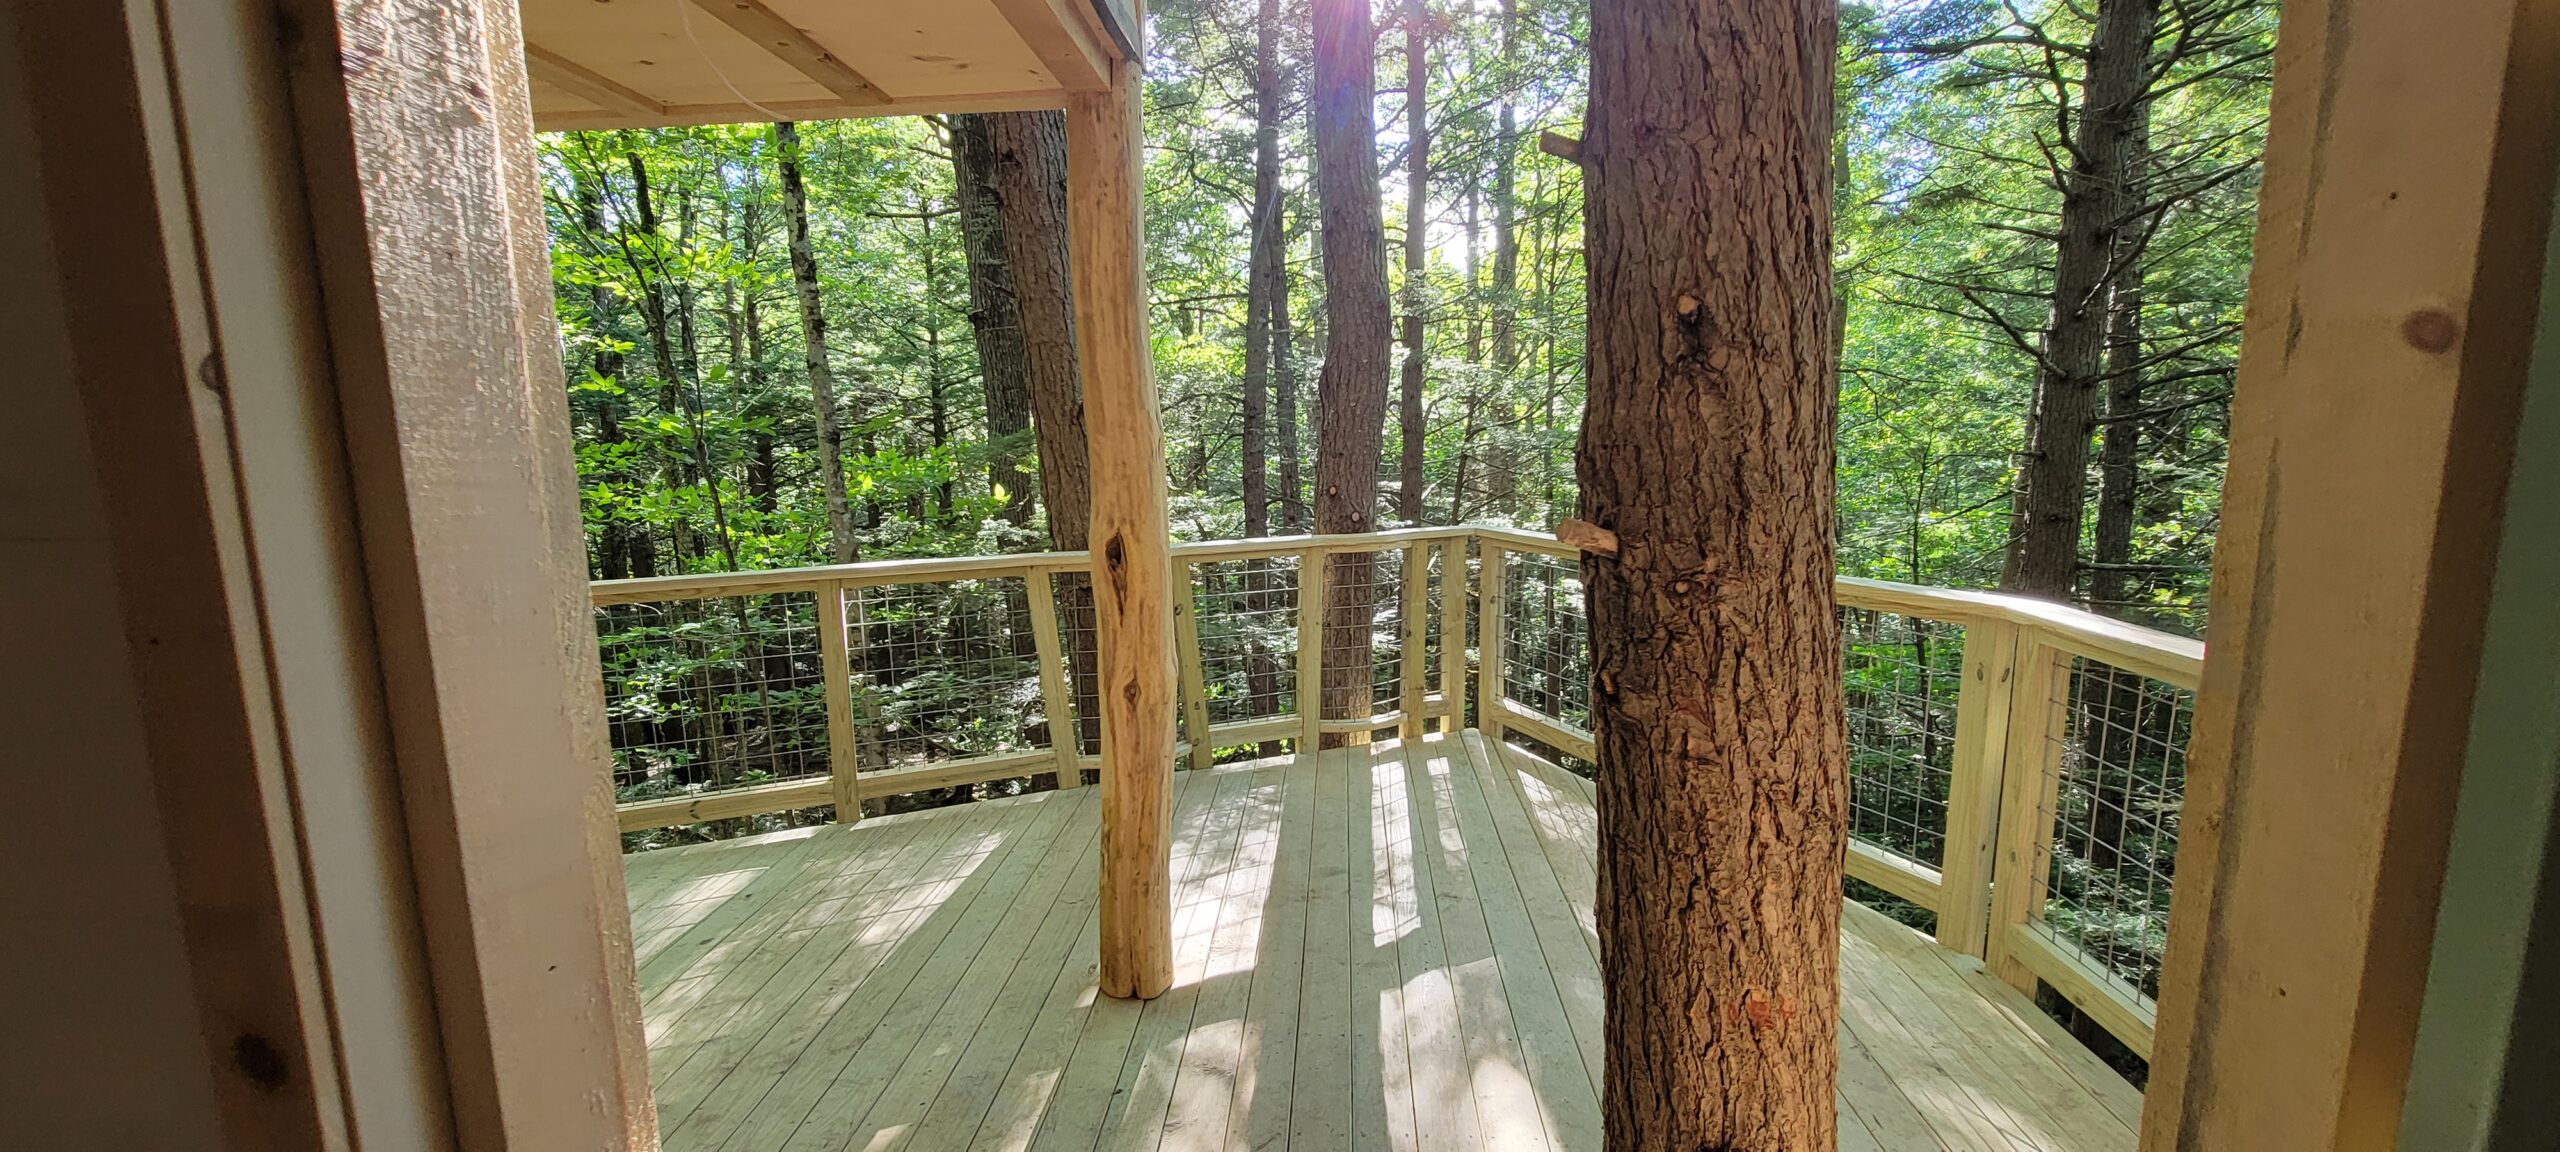 A mix of live trees and tree posts make for a cozy deck space in this rental treehouse.